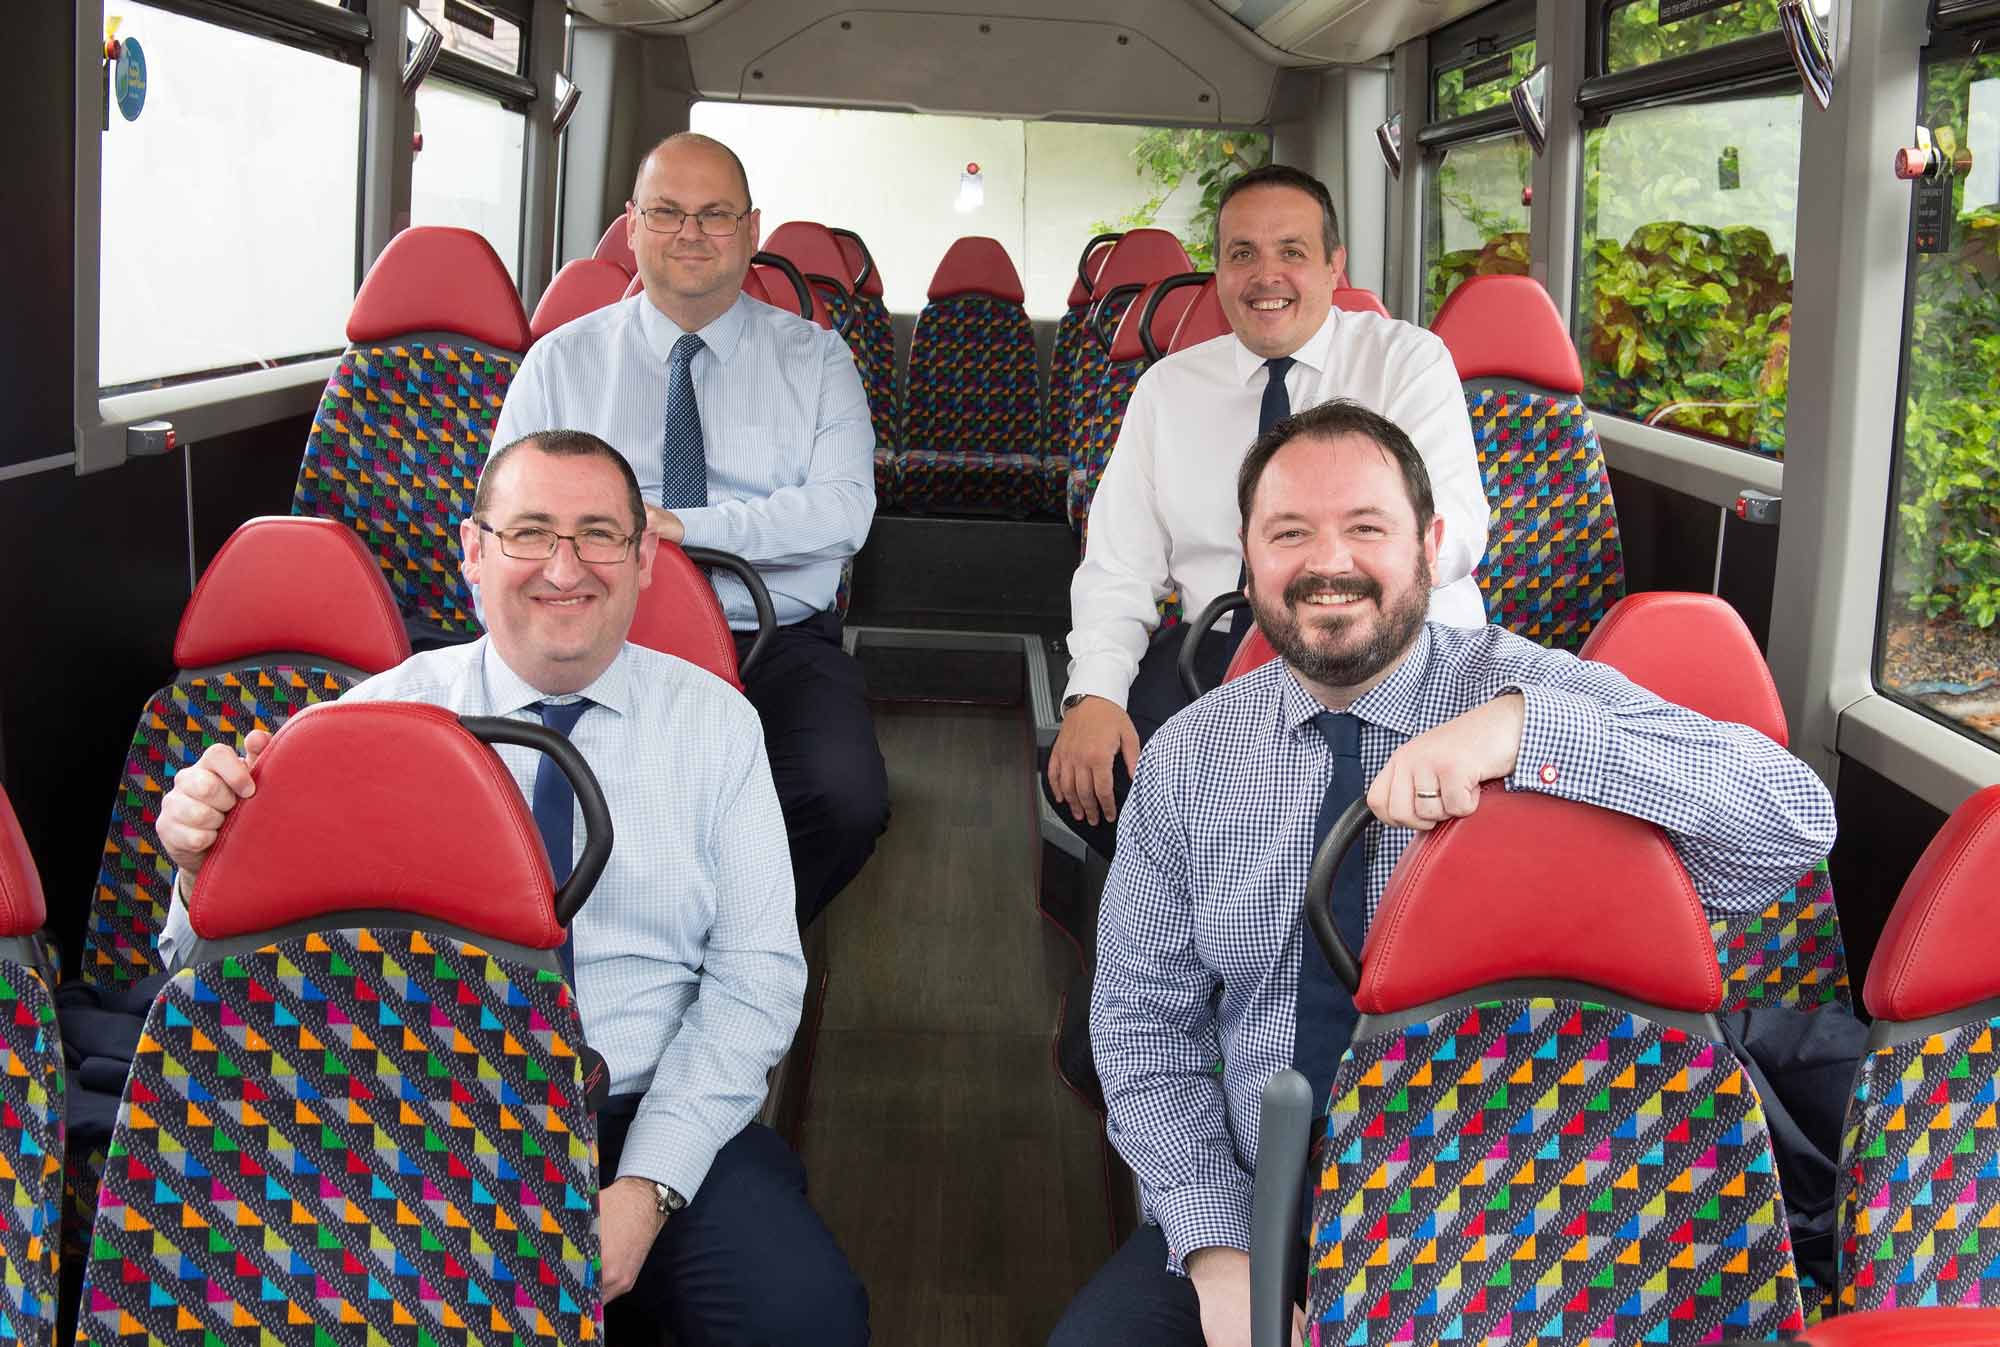 Transdev’s new Operations Director Vitto Pizzuti (back row, right) and Commercial Director Paul Turner (back row, left) join the bus operator’s boardroom team, seen here with Finance Director Mark Dale (front row, left) and CEO Alex Hornby